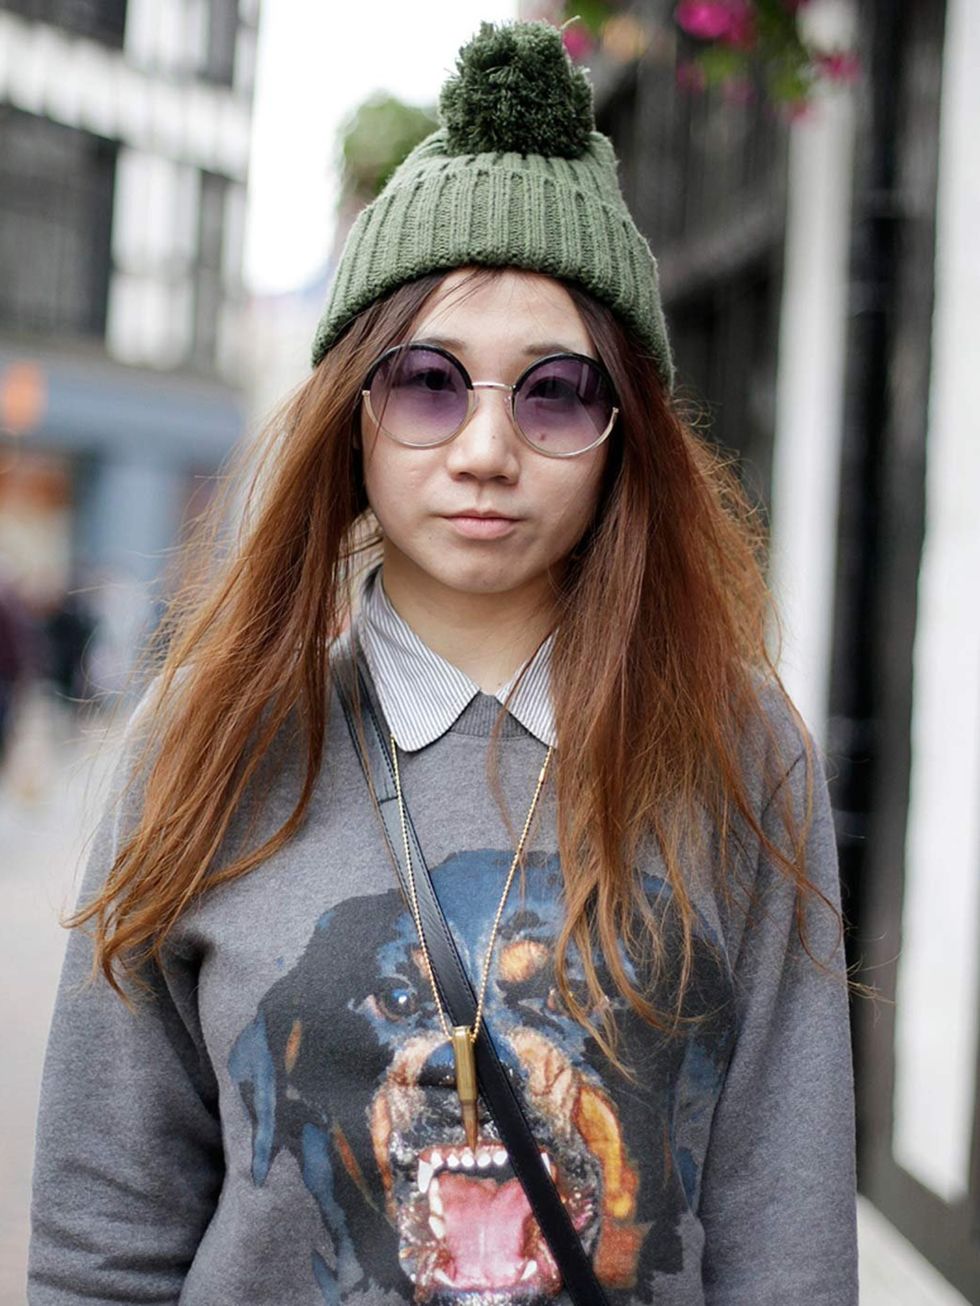 <p>Summer, 21, Student. Givenchy jumper, shirt from South Korea, hat from China.</p>